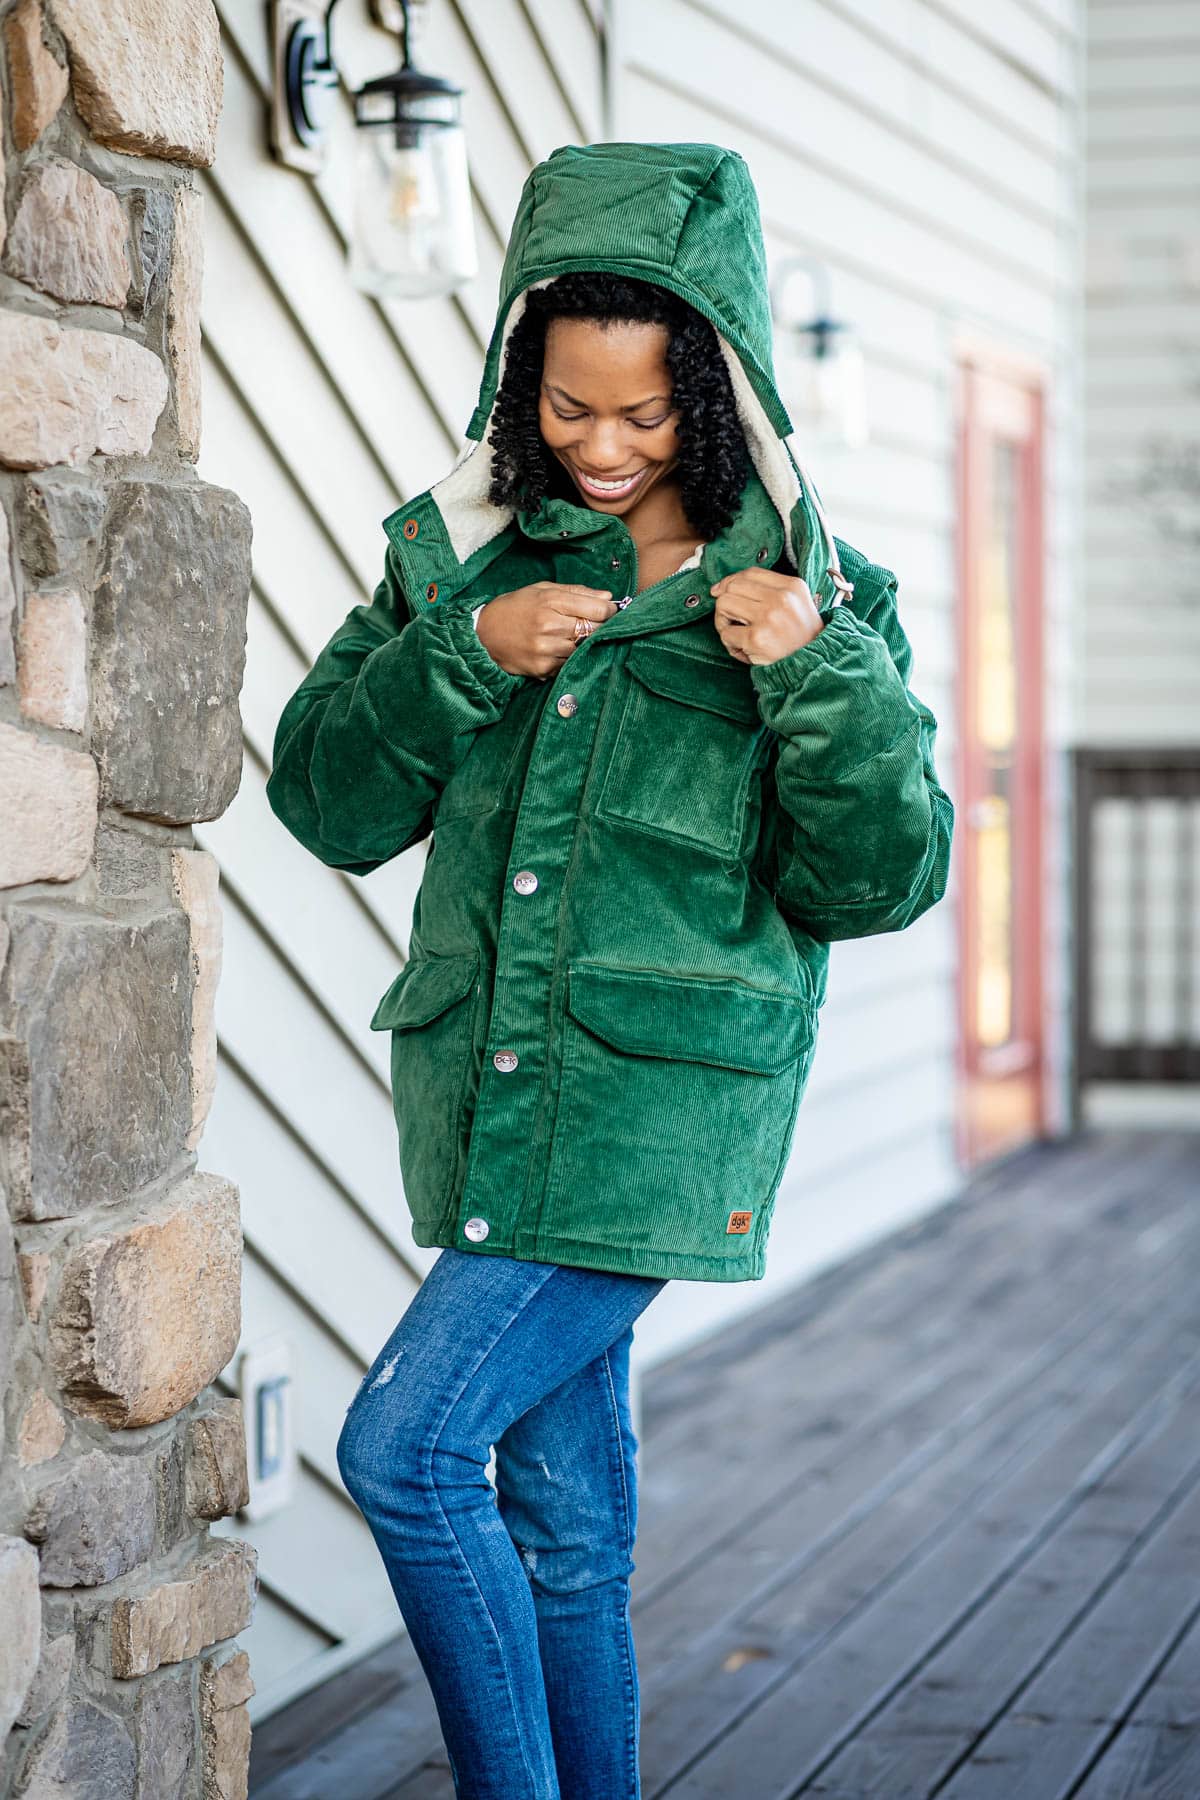 The Ultimate Guide To Comfortable Winter Clothes: Winter Outfit Ideas To Keep Warm During The Cold Weather 72 Daily Mom, Magazine For Families